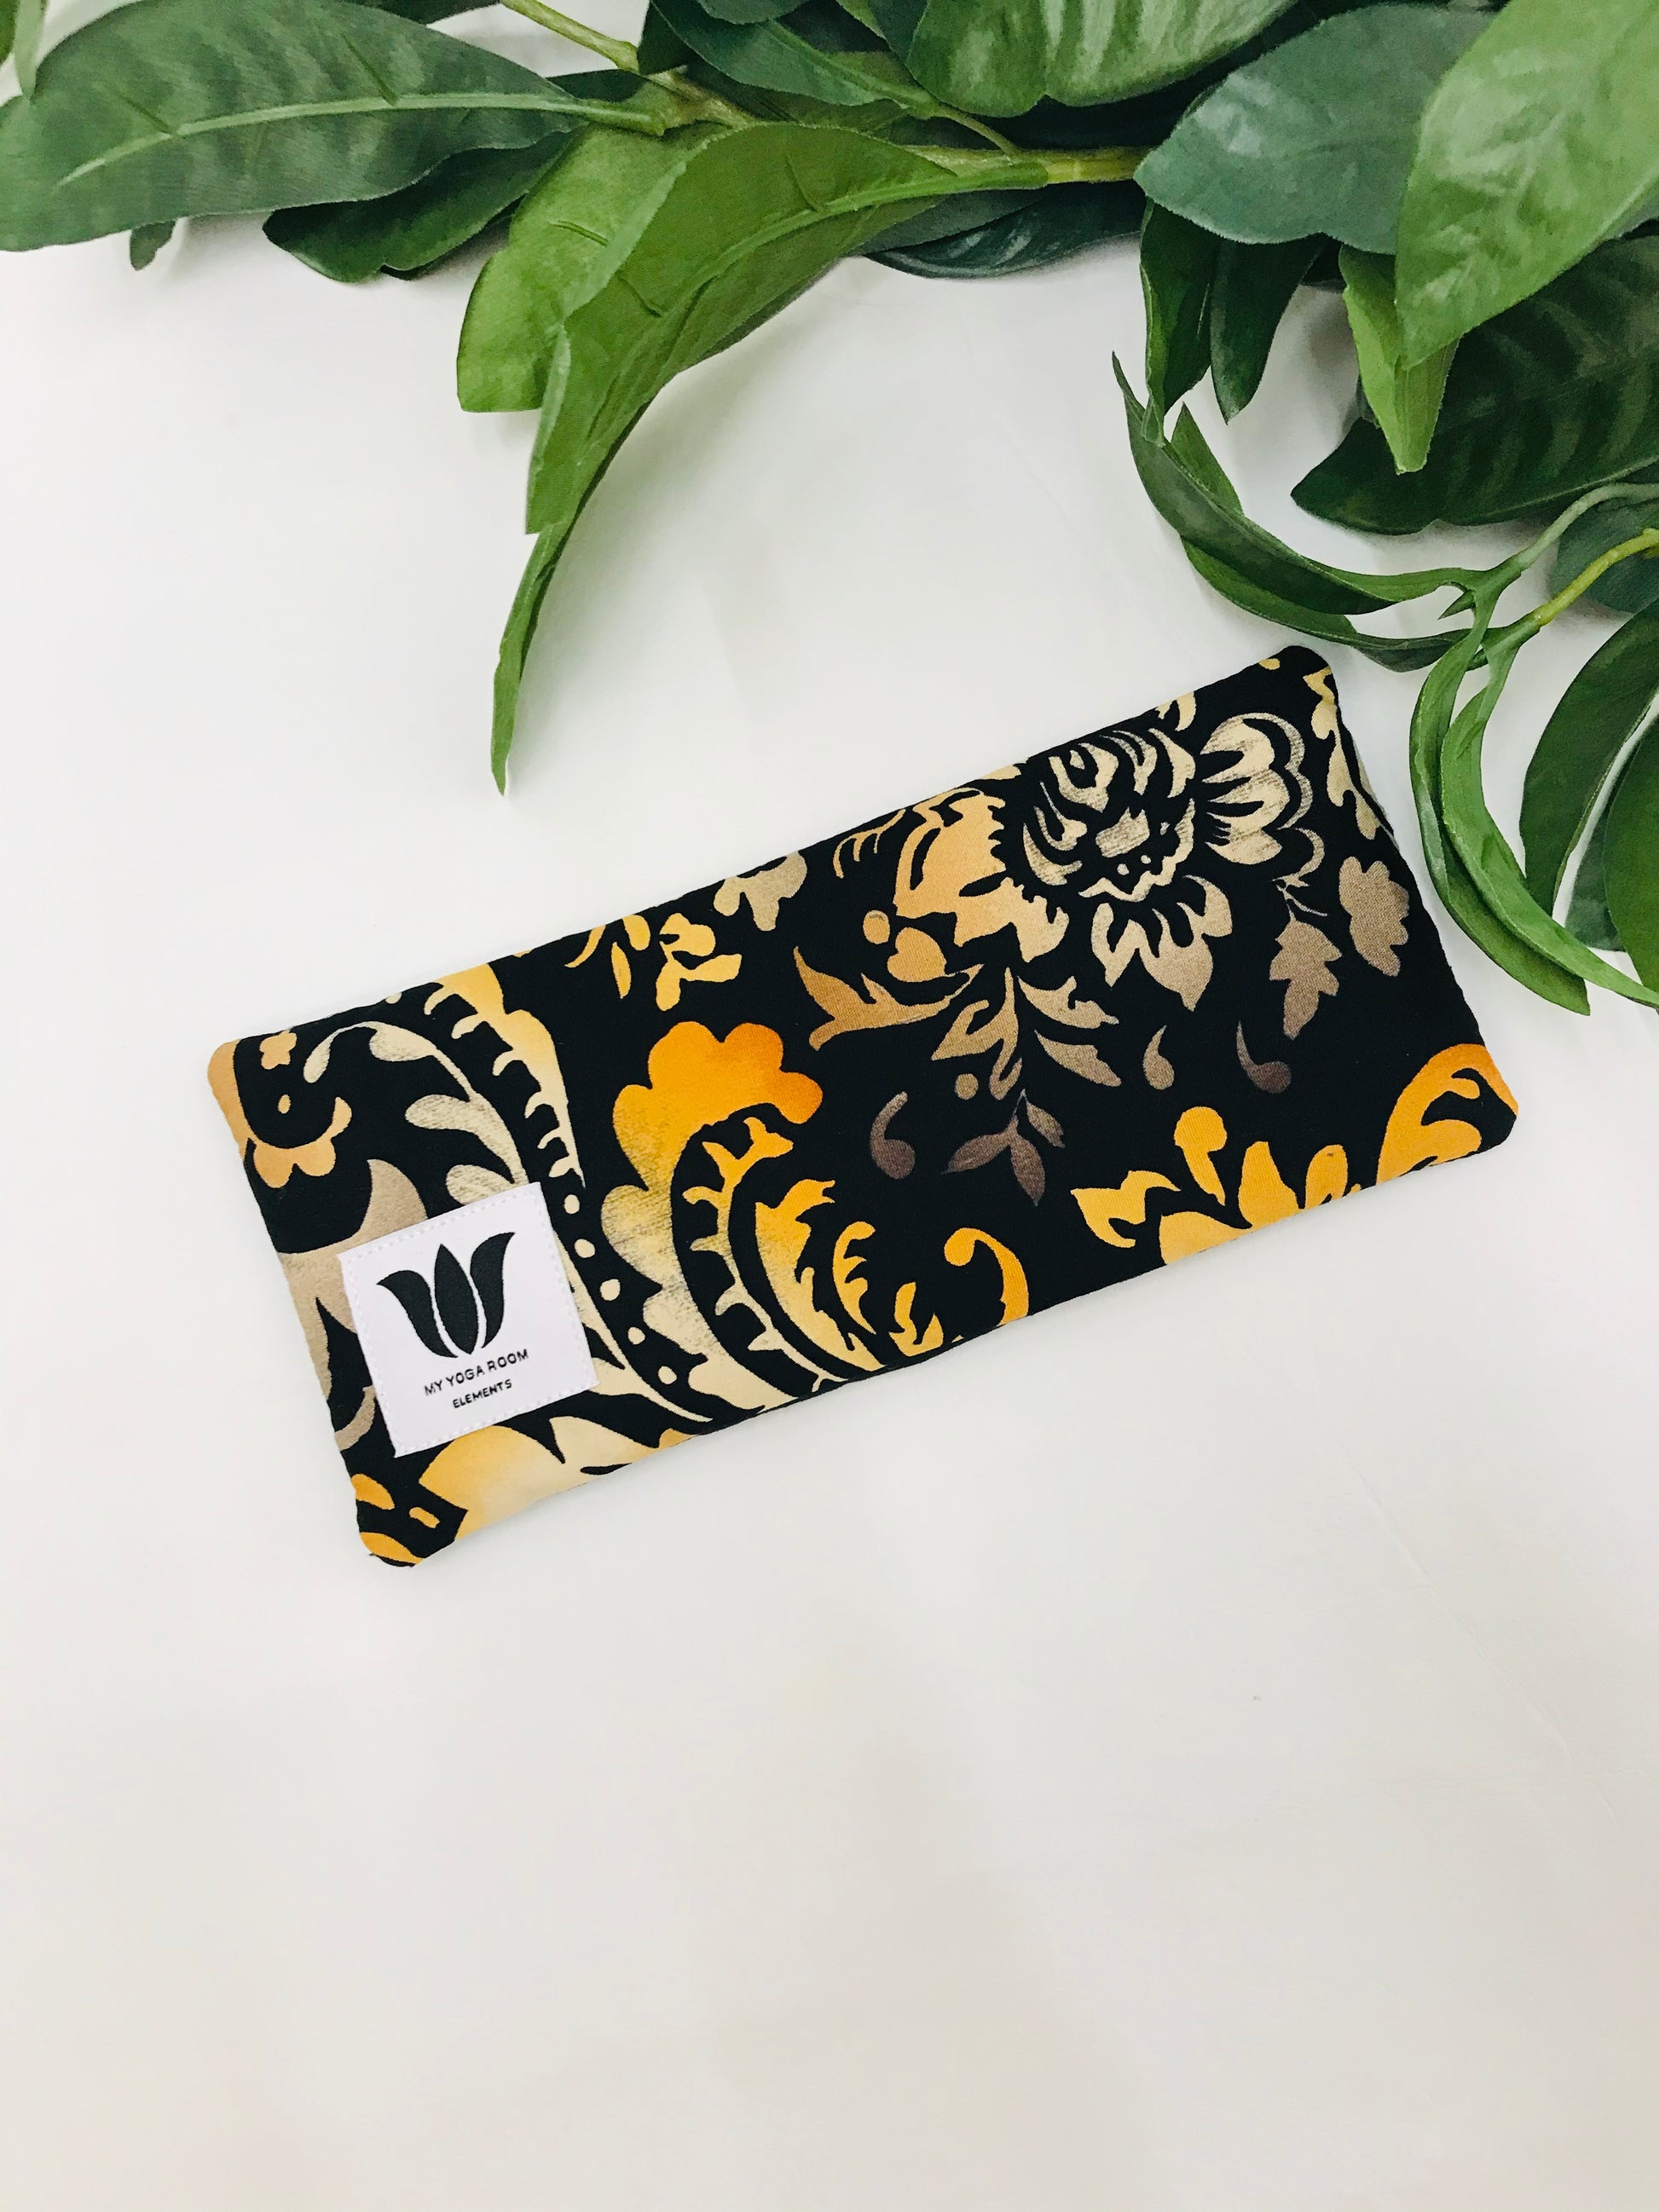 Yoga eye pillow, unscented, therapeutically weighted to soothe eye strain and stress or enhance your savasana. Handcrafted in Canada by My Yoga Room Elements. Autumn damask print and bamboo fabric.